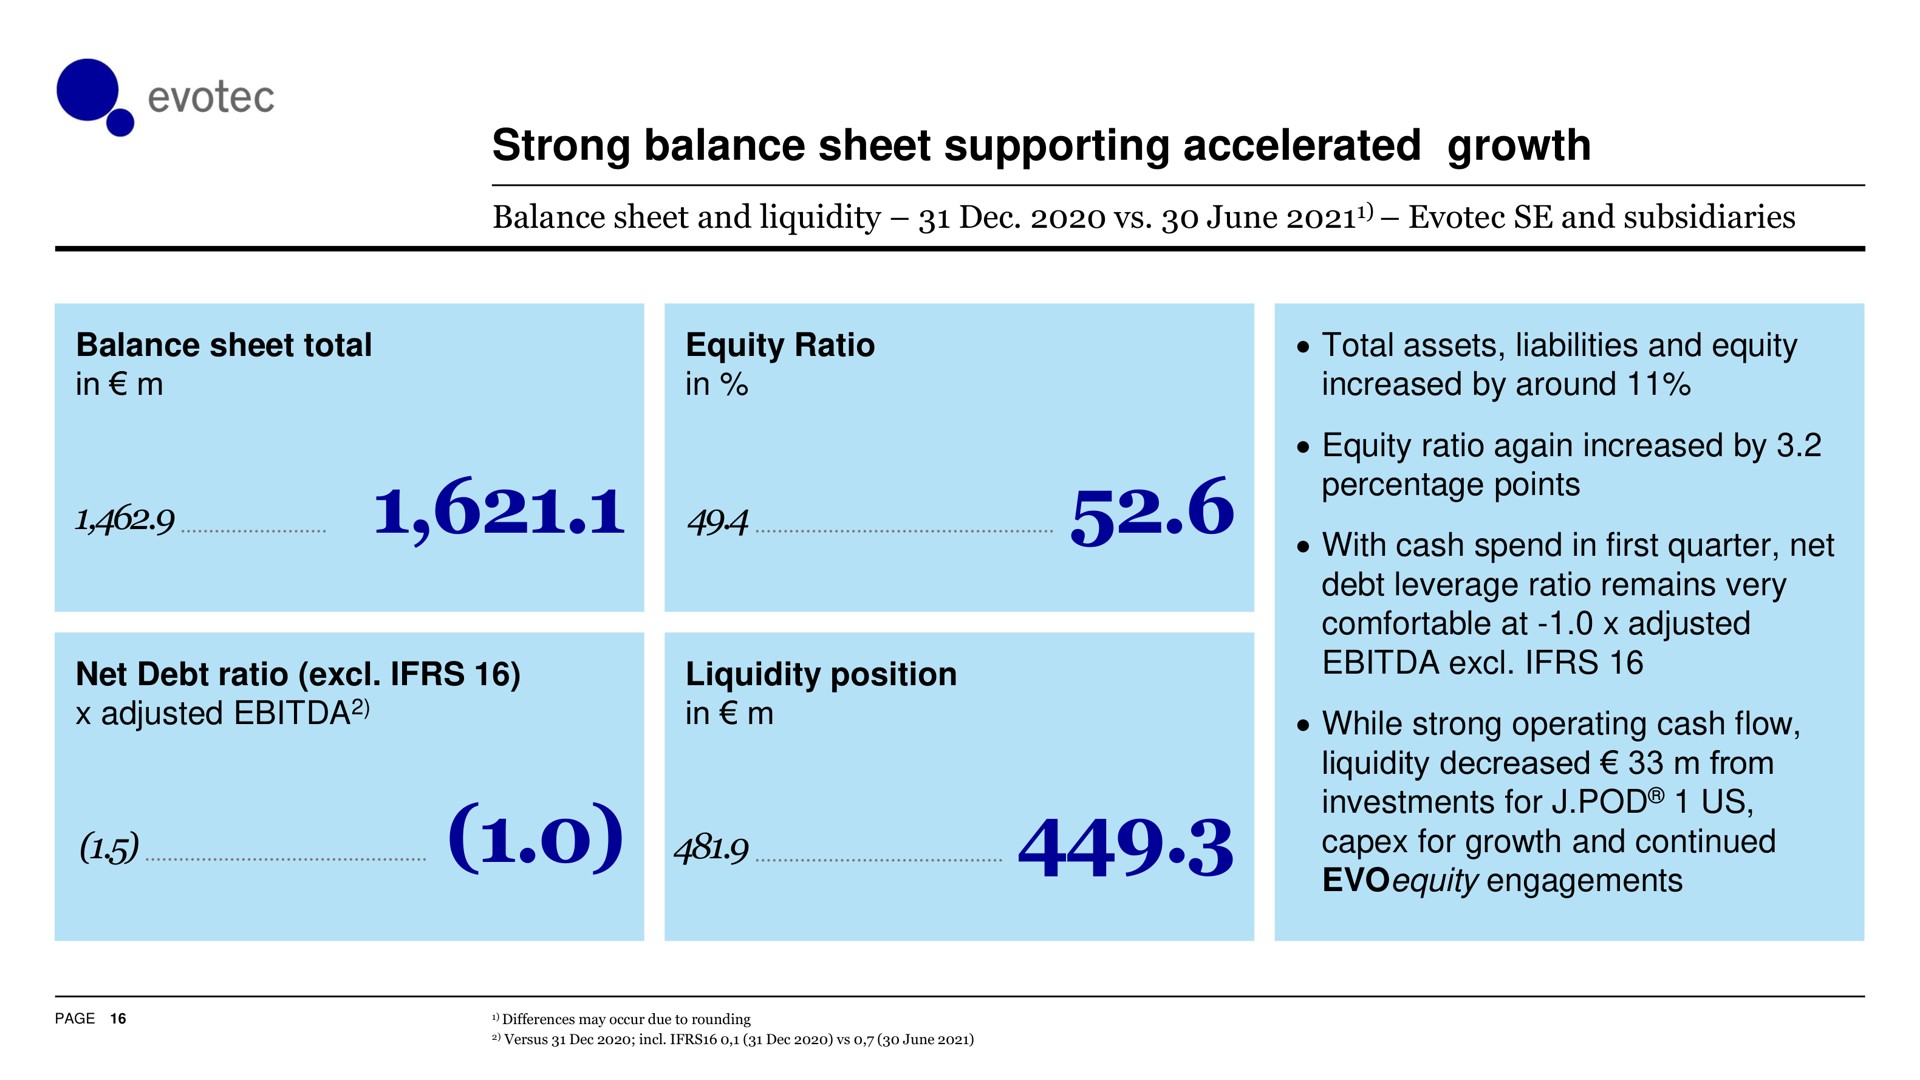 strong balance sheet supporting accelerated growth net debt ratio liquidity position and continued | Evotec